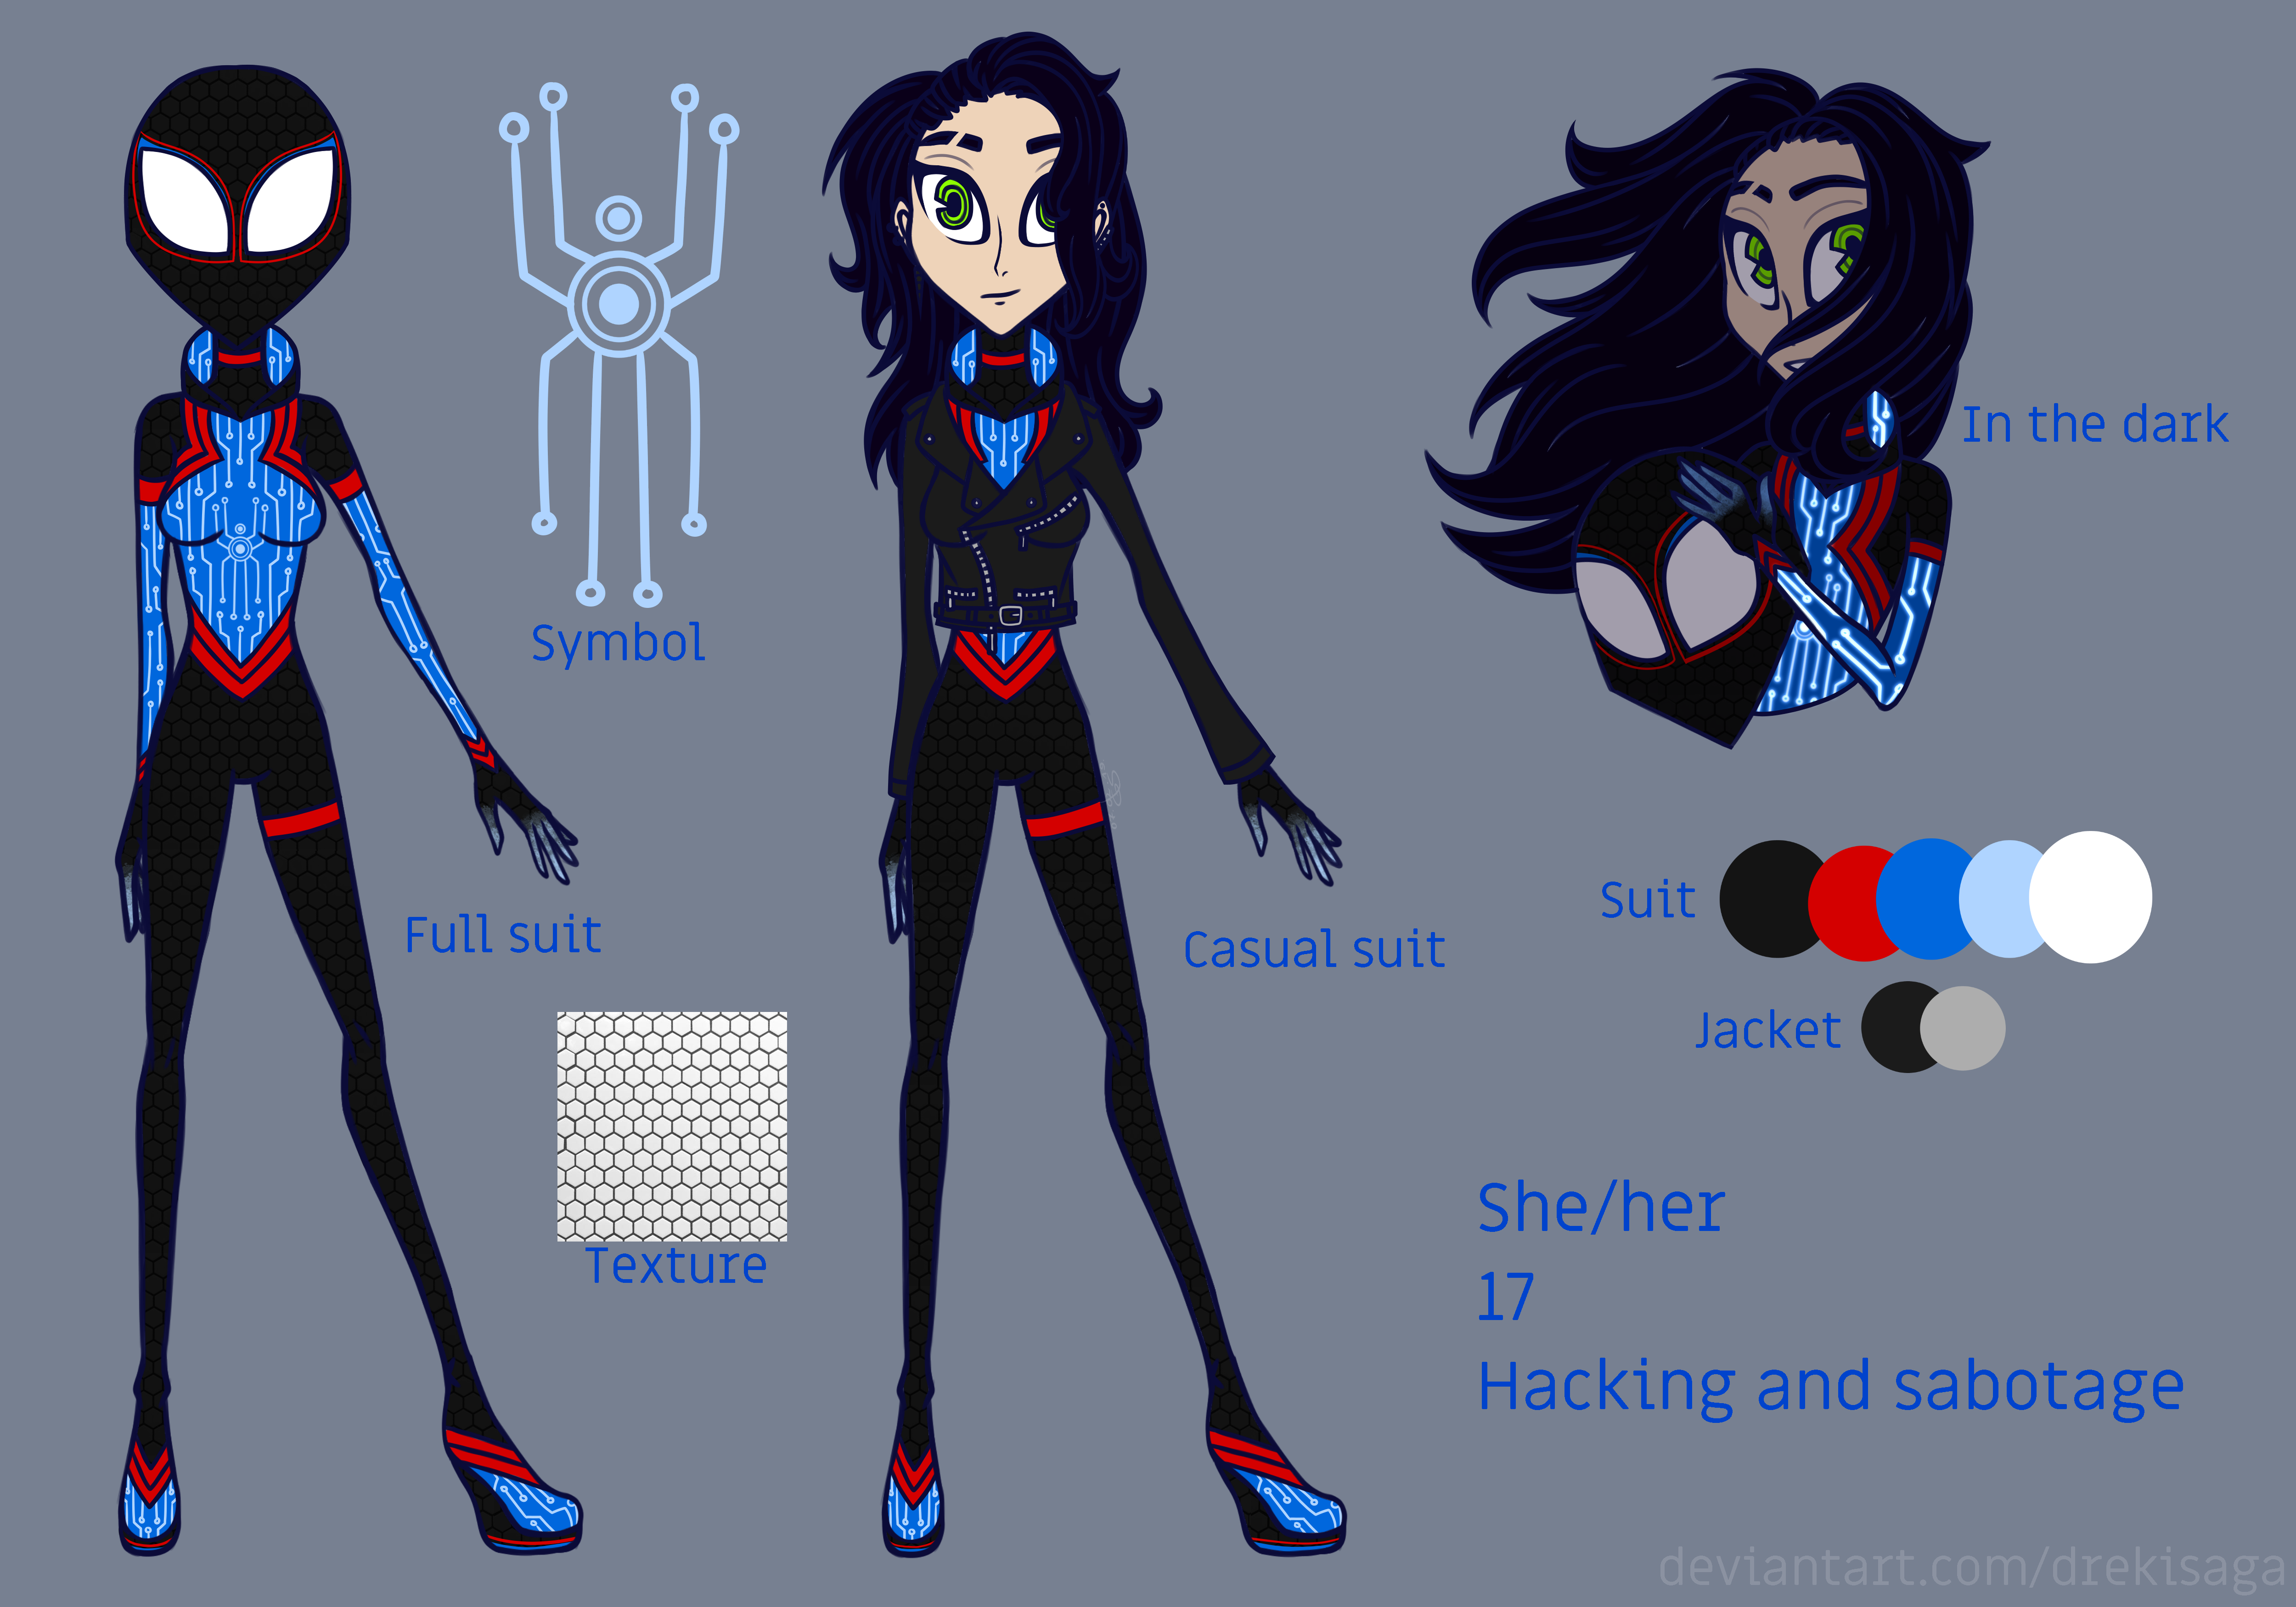 Spidersona [COMMISSION] by IGuanche on DeviantArt